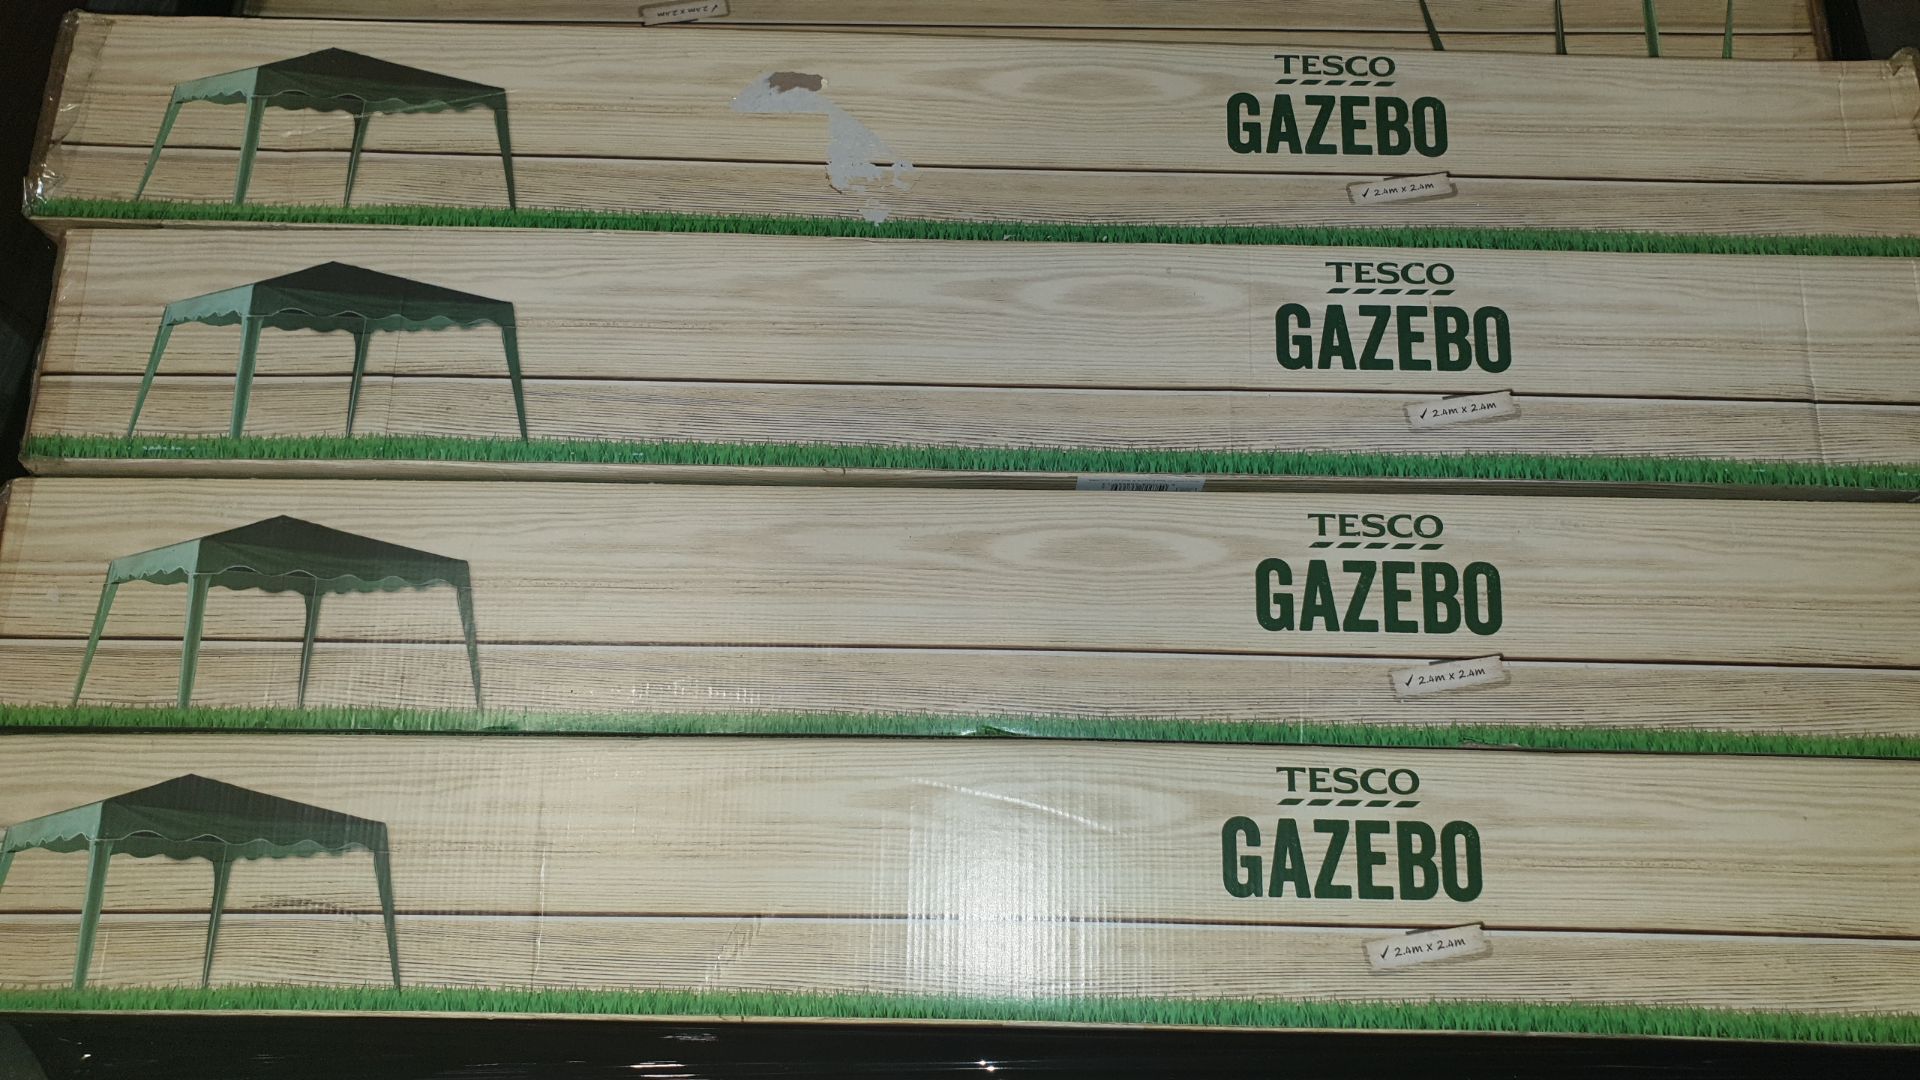 (LOT FOR THURSDAY 28TH MAY AUCTION) 6 X GREEN GAZEBOS 2.4 X 2.4 M (NOTE SOME BOXES ARE DAMAGED)